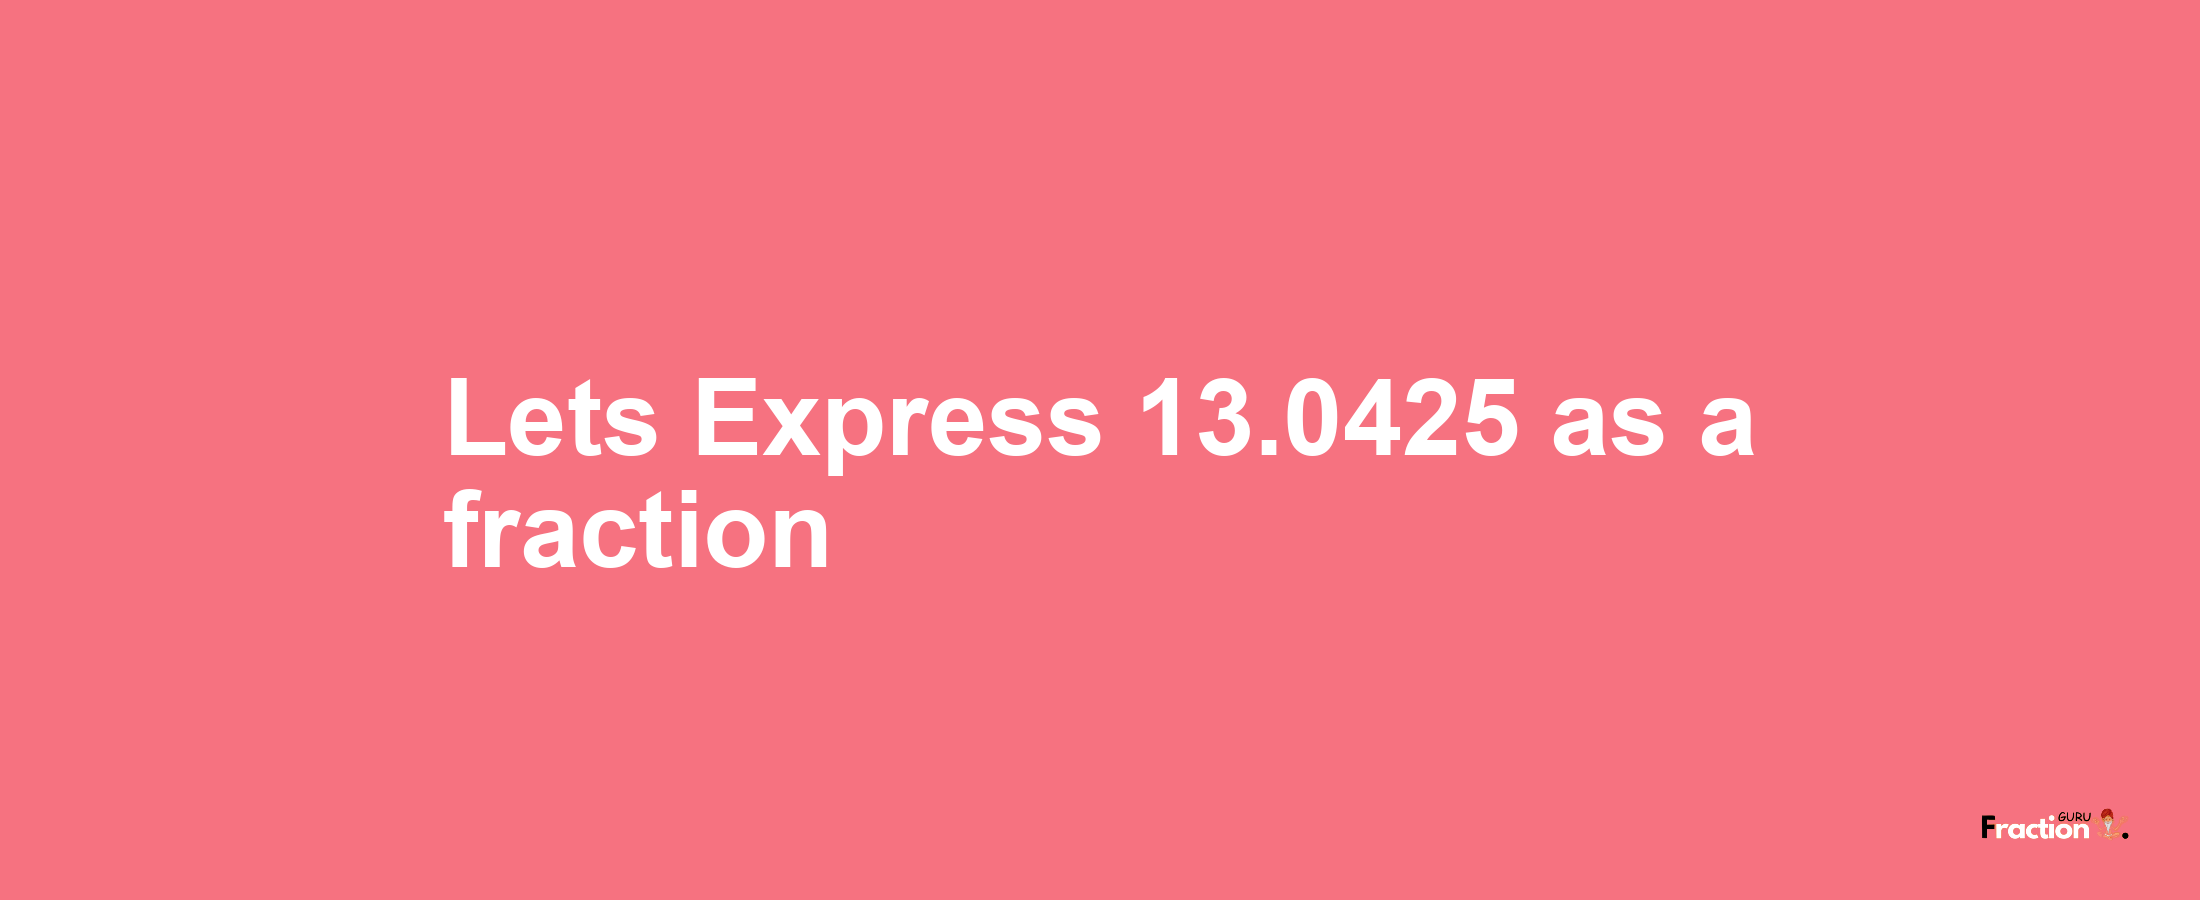 Lets Express 13.0425 as afraction